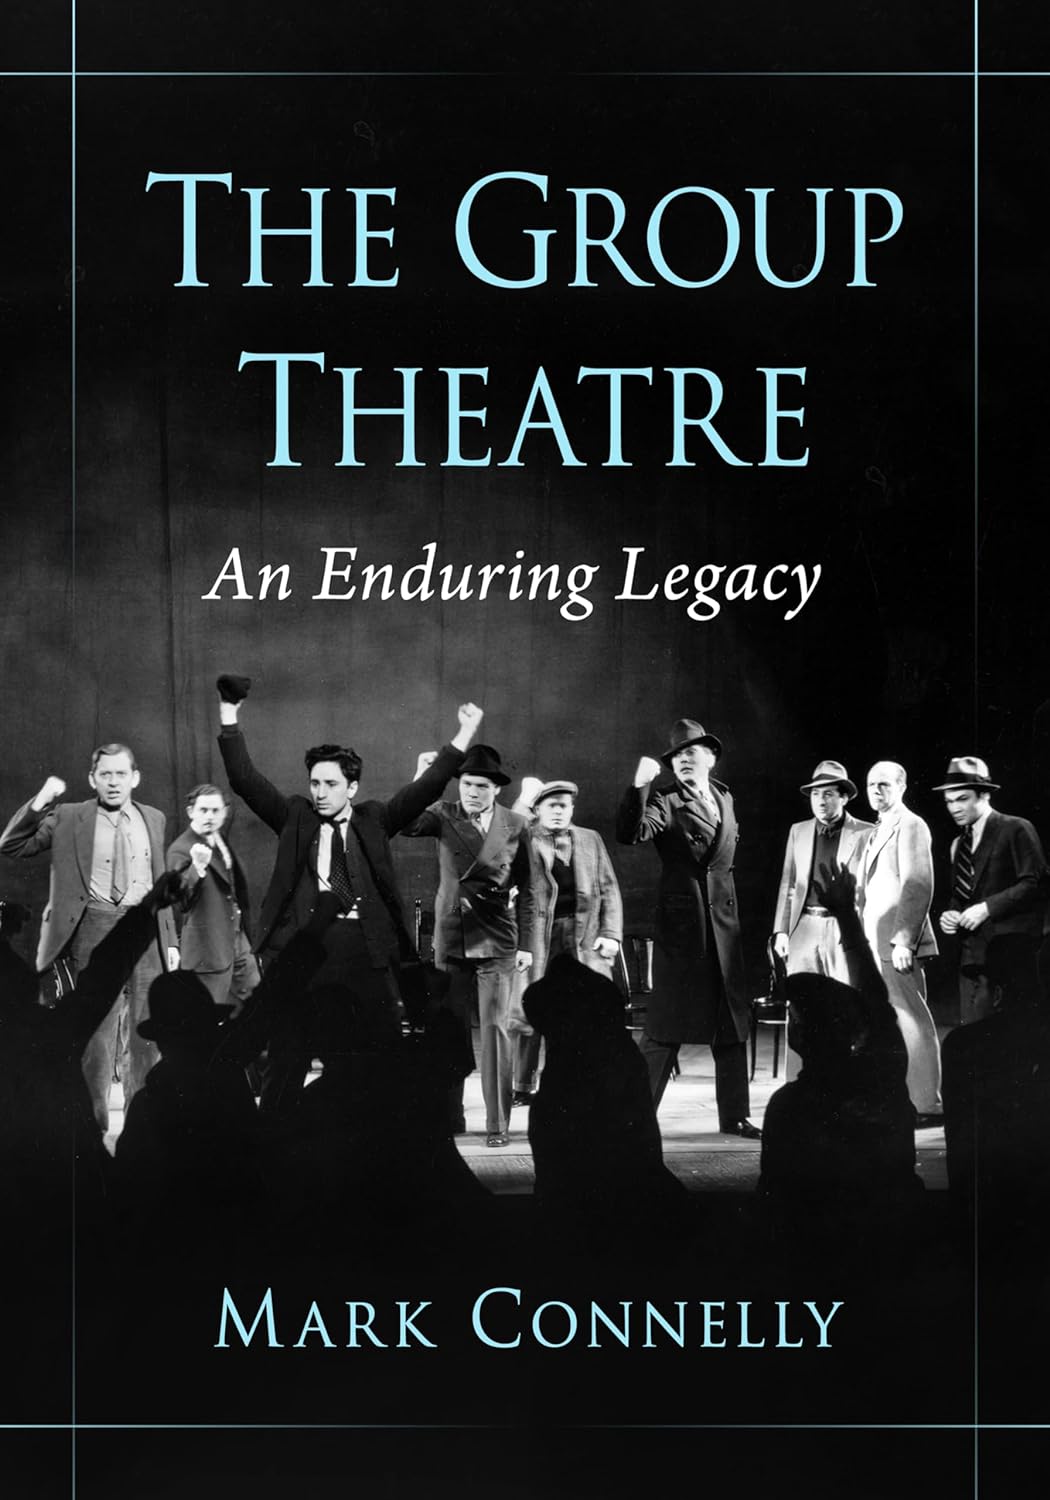 The Group Theatre: An Enduring Legacy by Mark Connelly